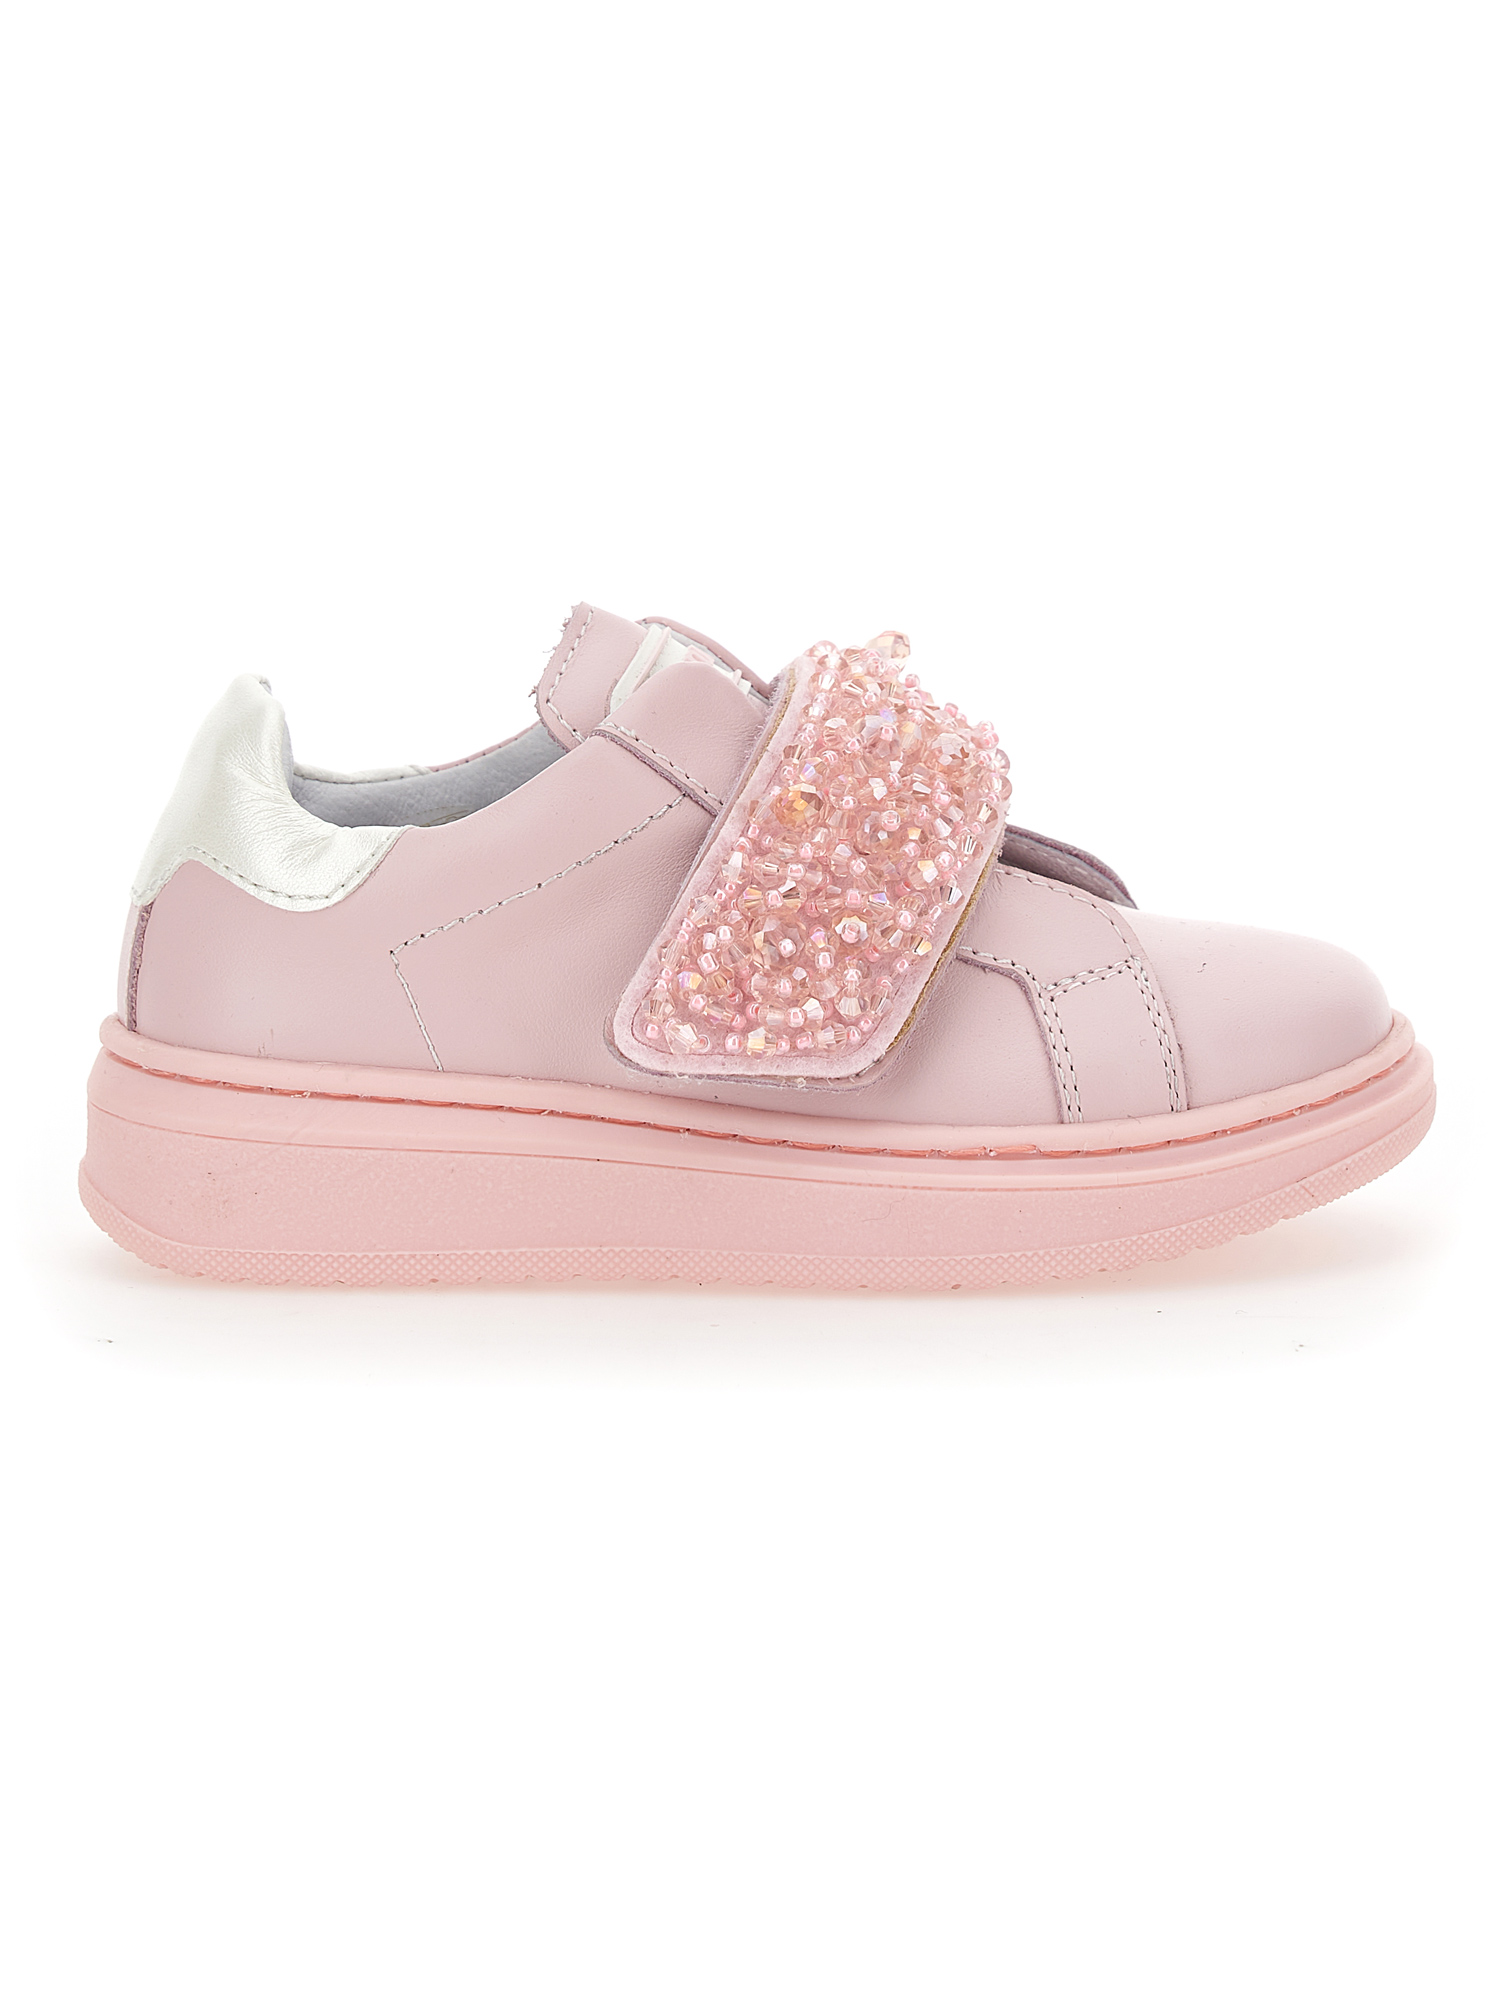 Monnalisa Leather Sneakers With Dégradé Rhinestones In Rosa Fairy Tale